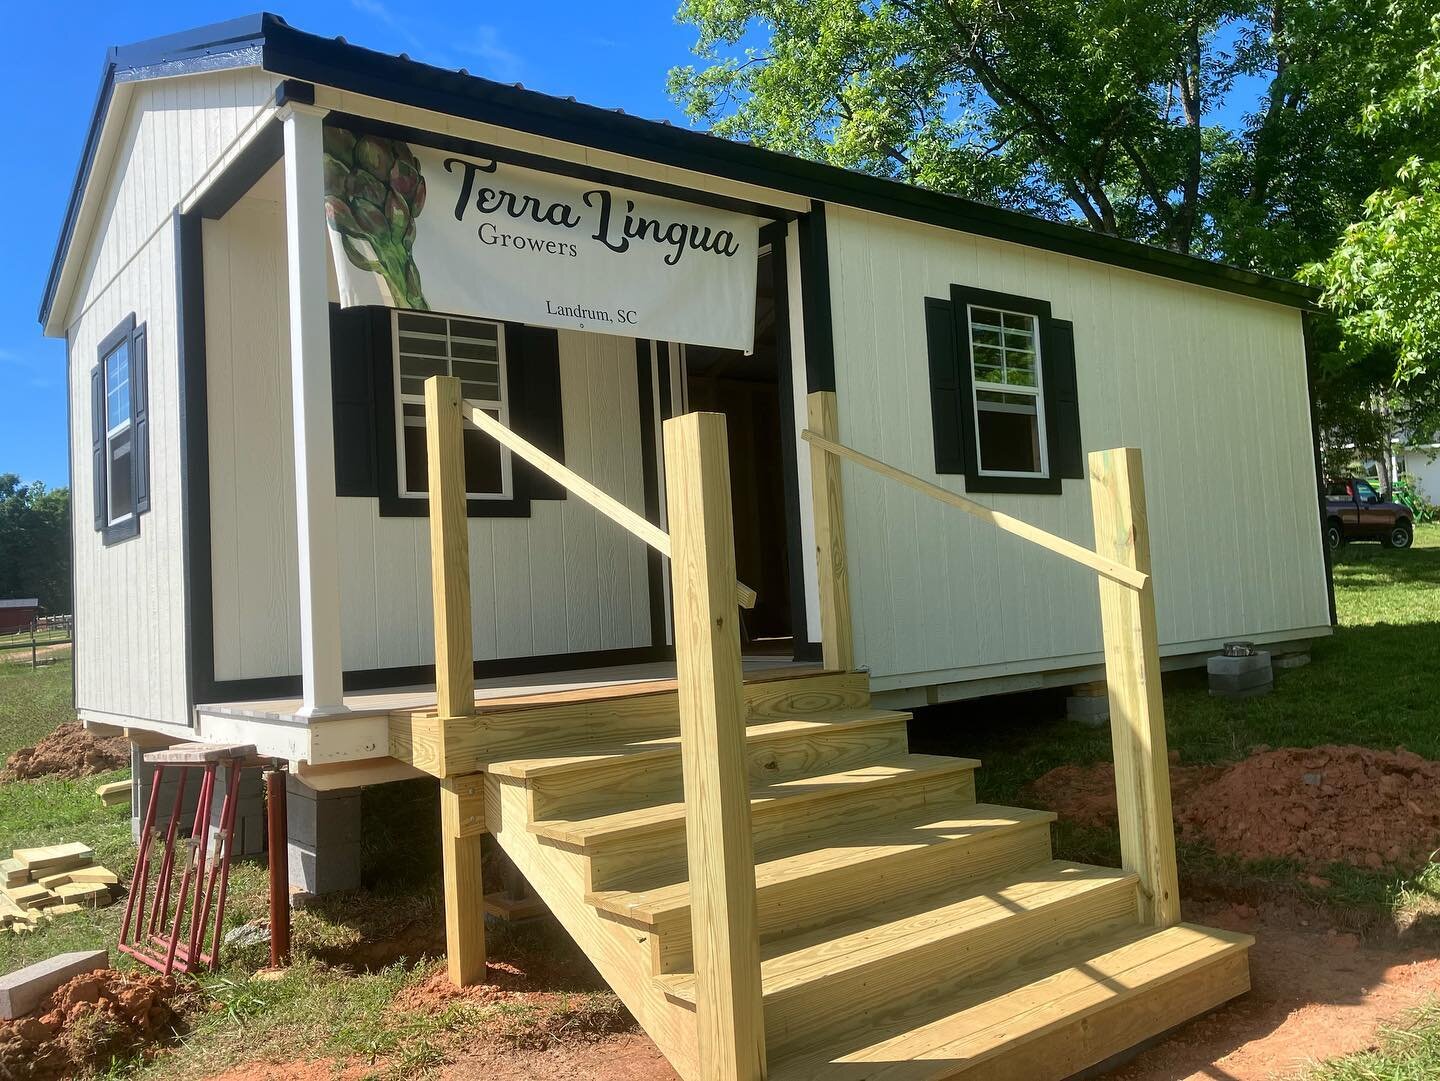 The Terra Lingua farm store is up and running! Store hours are Wednesday and Thursday, 3pm-6pm. This week we have lettuce, broccoli, snow peas, kale, cabbage, scallions, radishes, and much more. To see availability, check out the farm store tab on ou